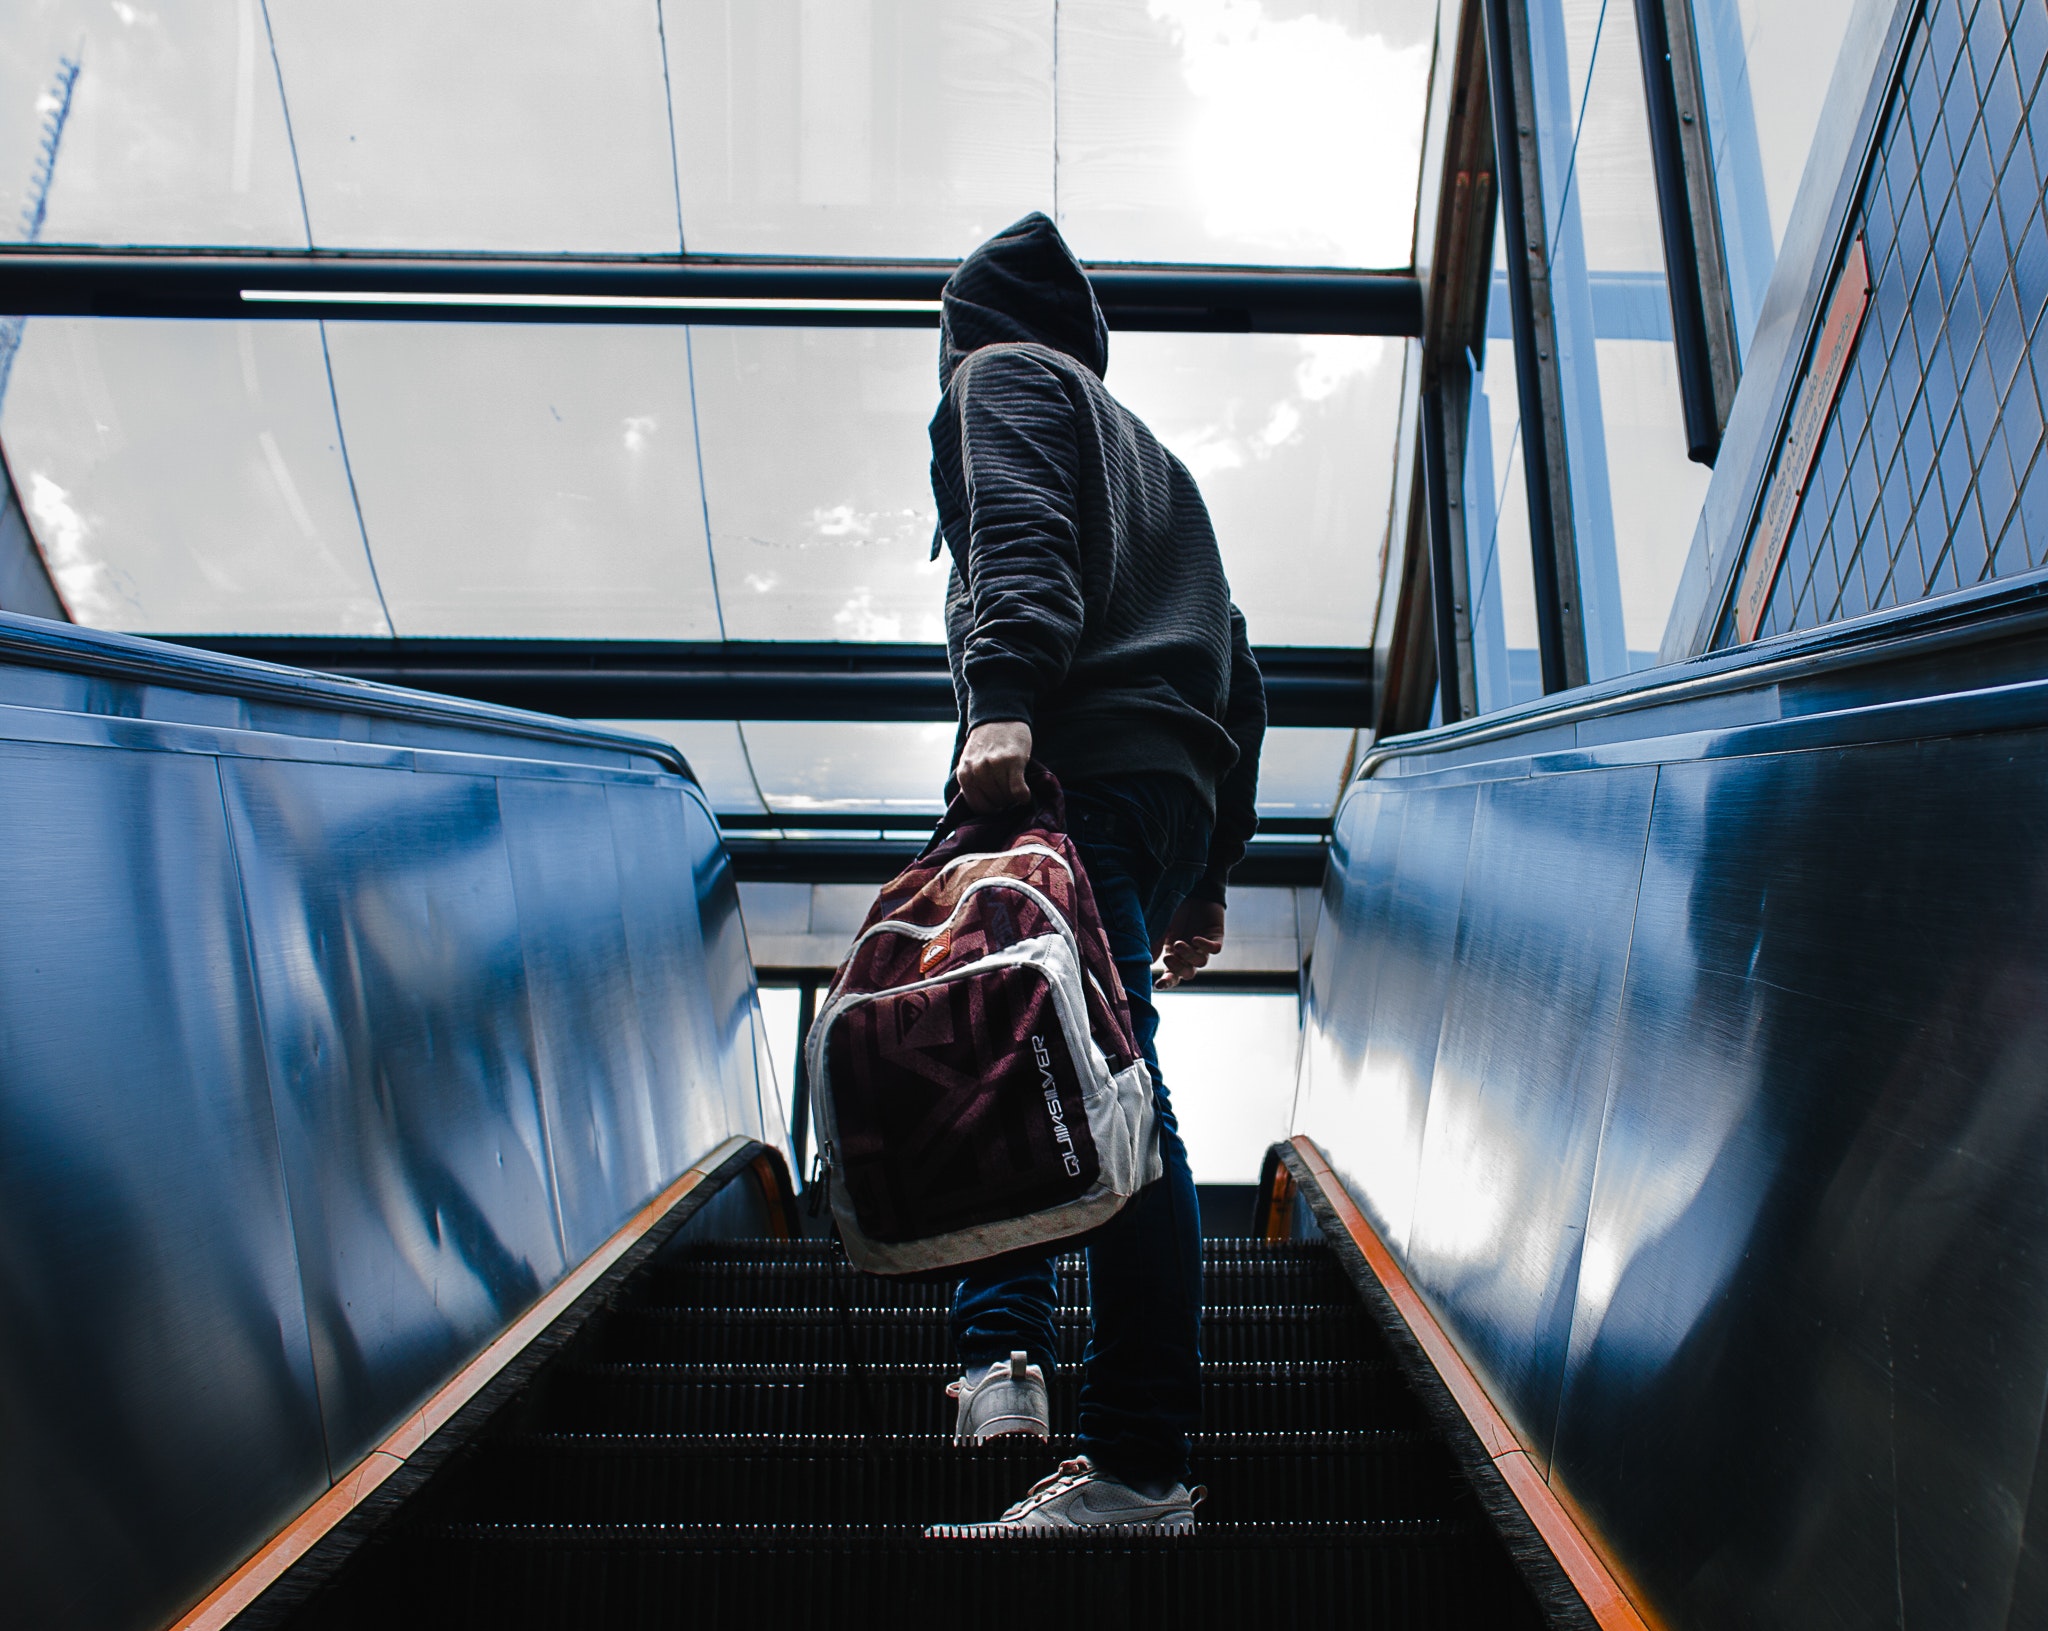 Person wearing black hooded jacket standing on escalator while holding backpack photo